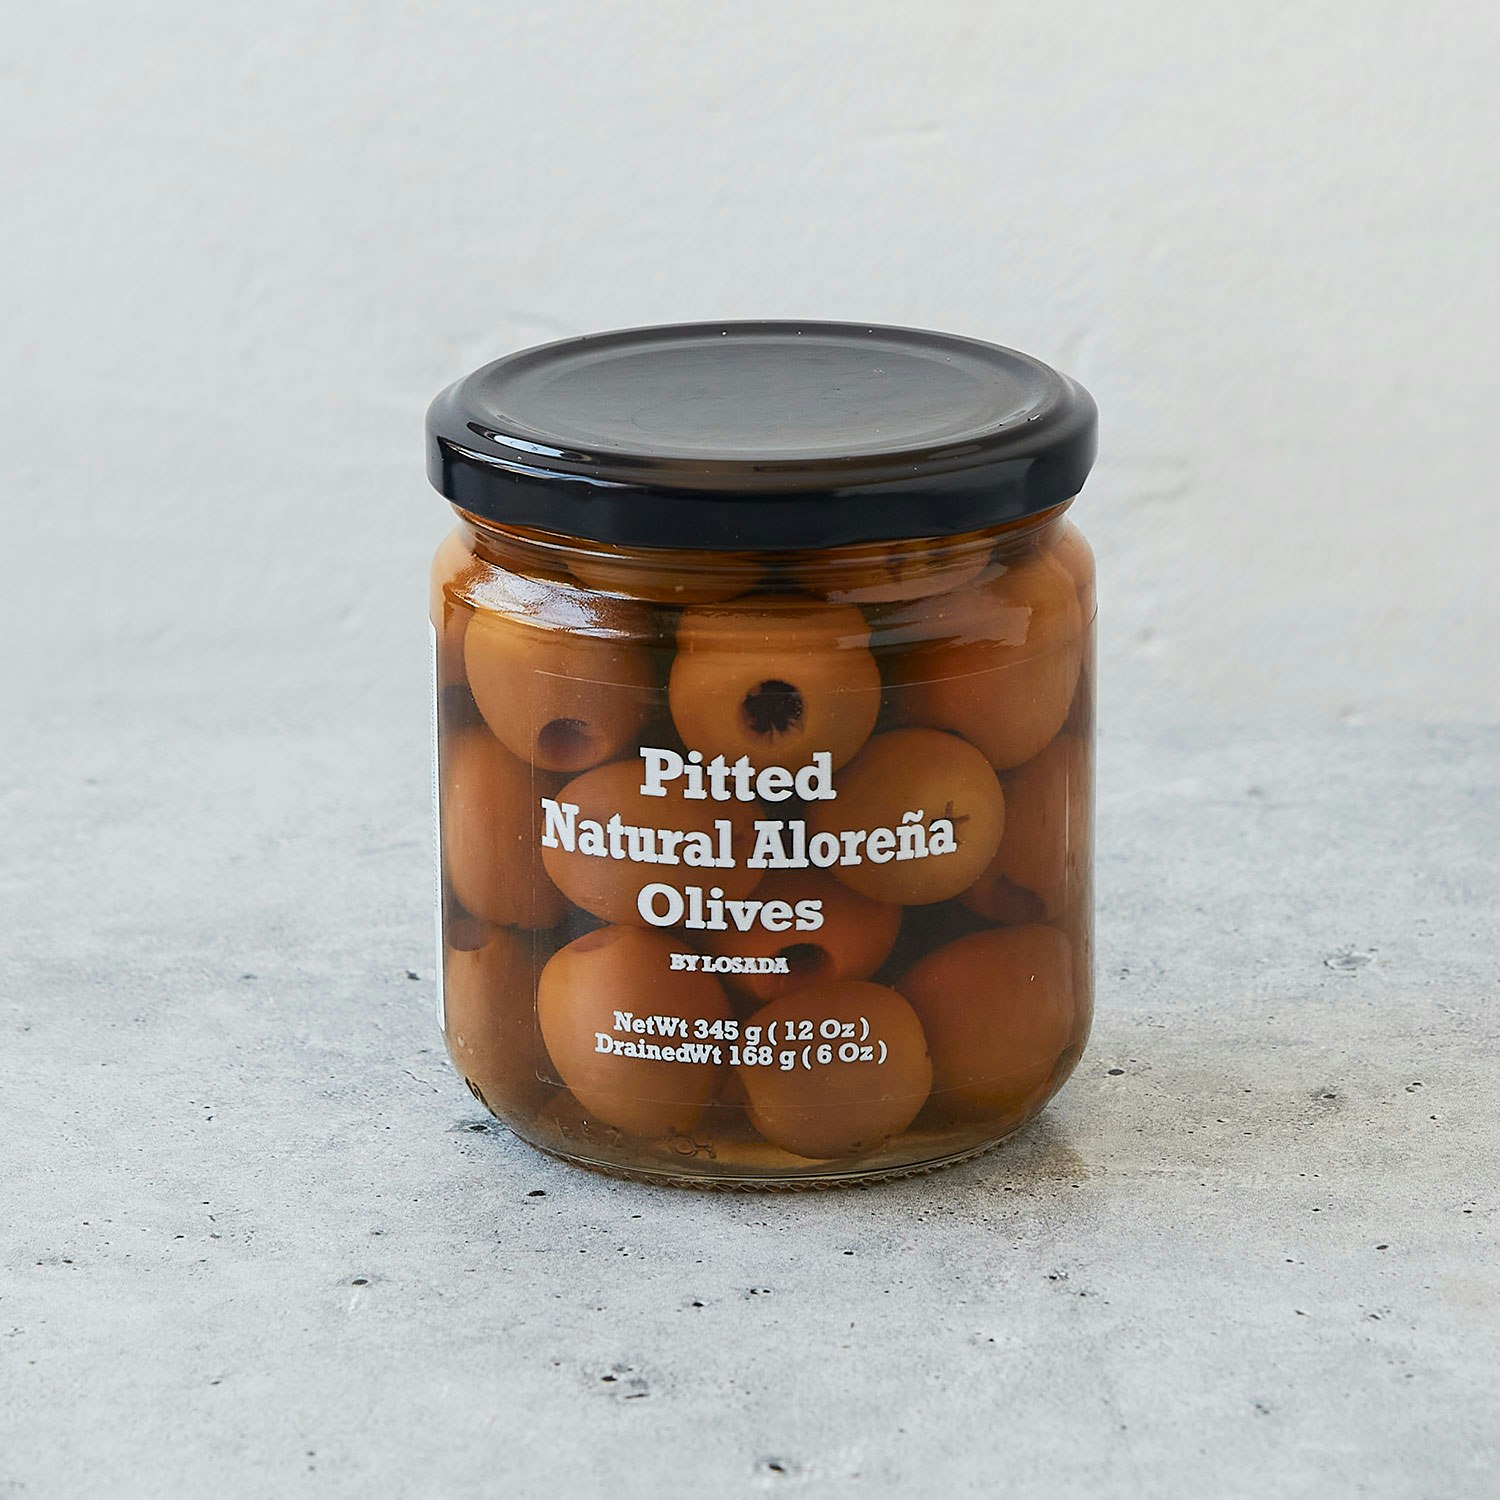 Losada Alore%C3%B1a Olives Pitted specialty foods